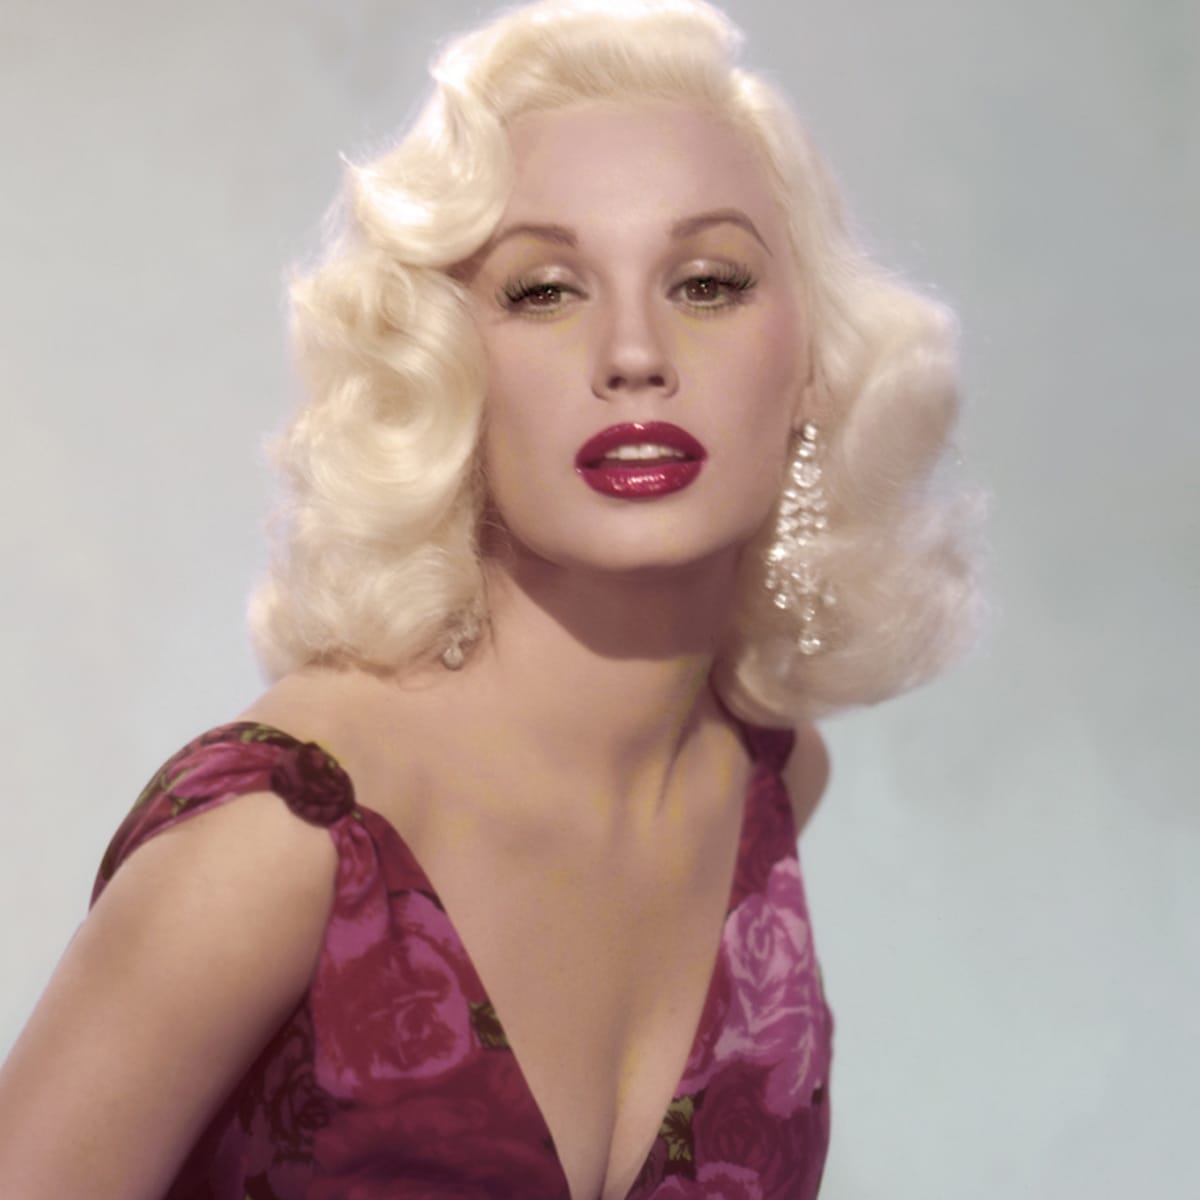 Classic 1950s Hairstyles. Vintage Hair - HubPages